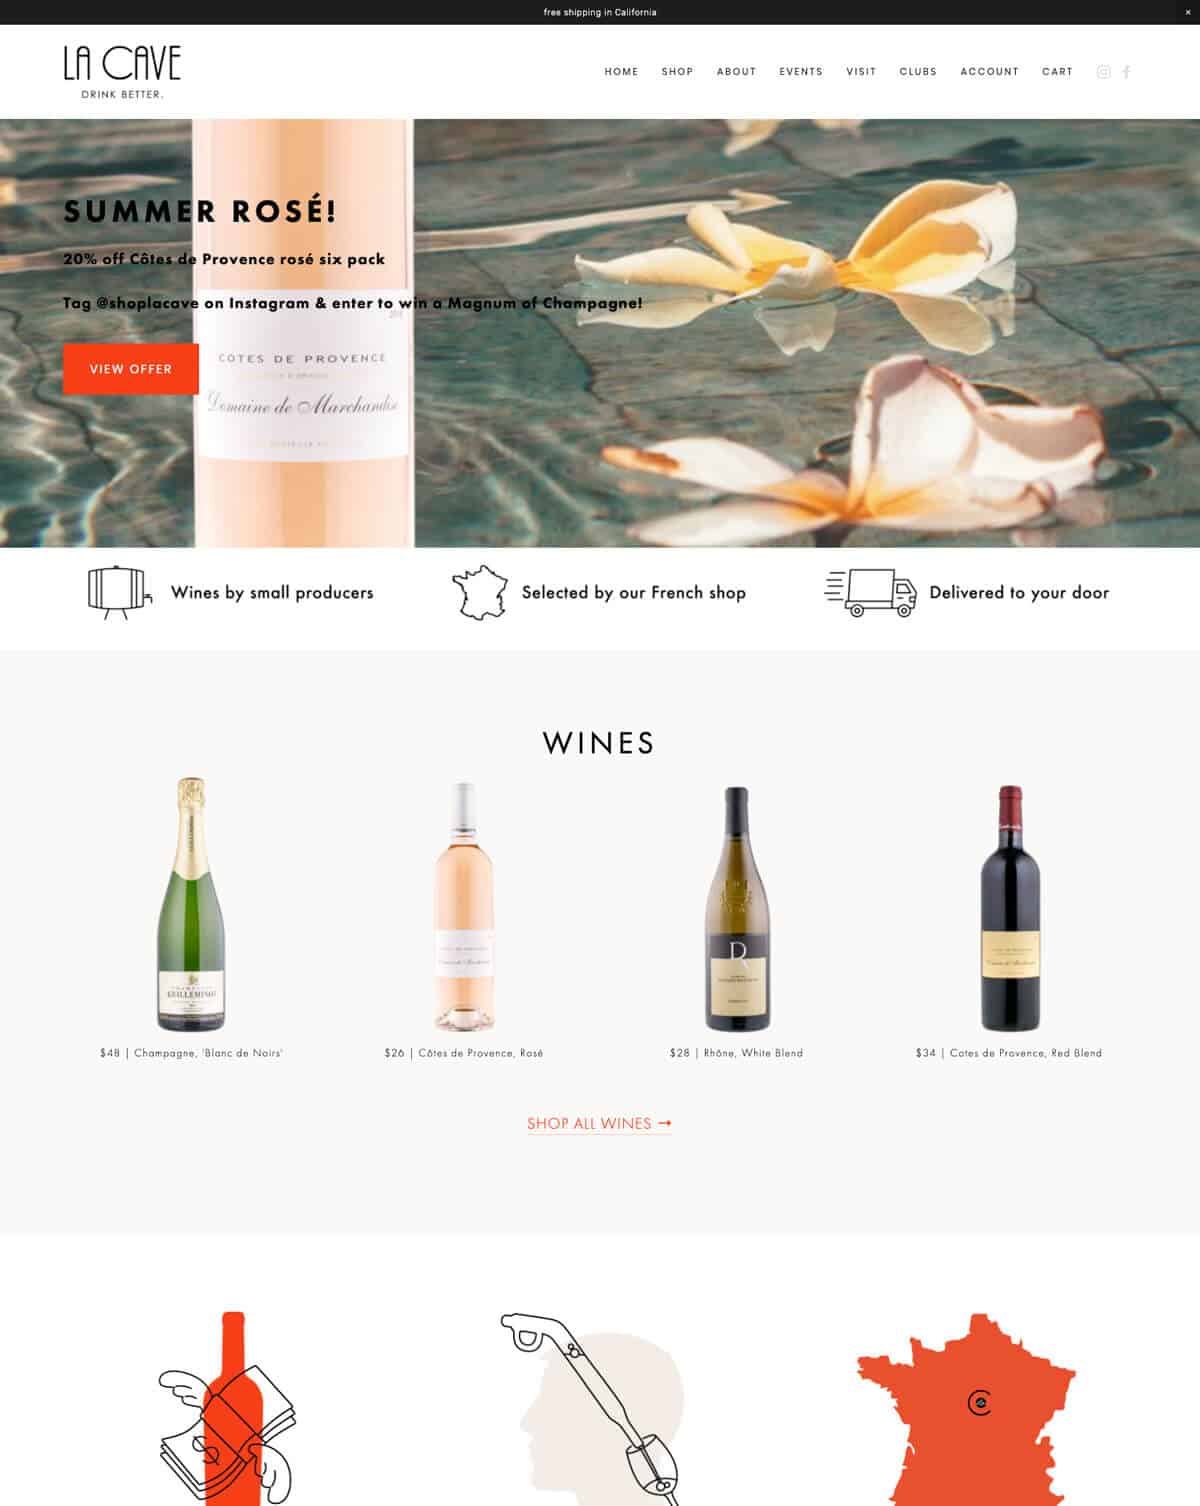 la-cave-home-featured-wines-wine-marketing-vinespring